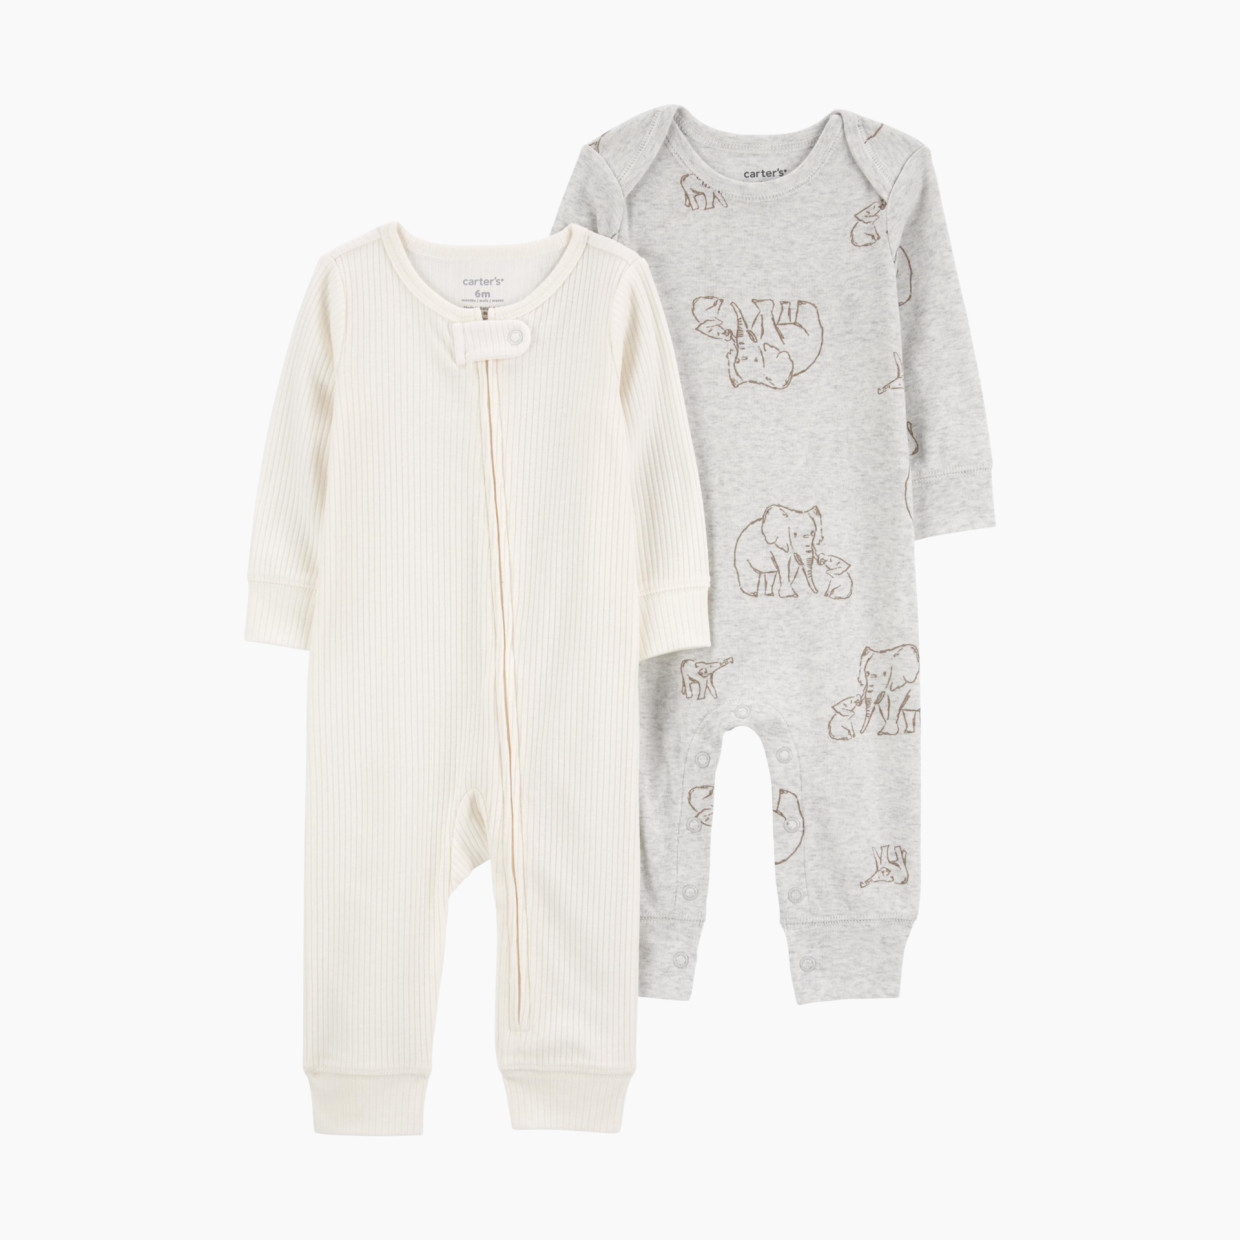 Carter's 2-Pack Jumpsuits - Grey/White, 9 M.